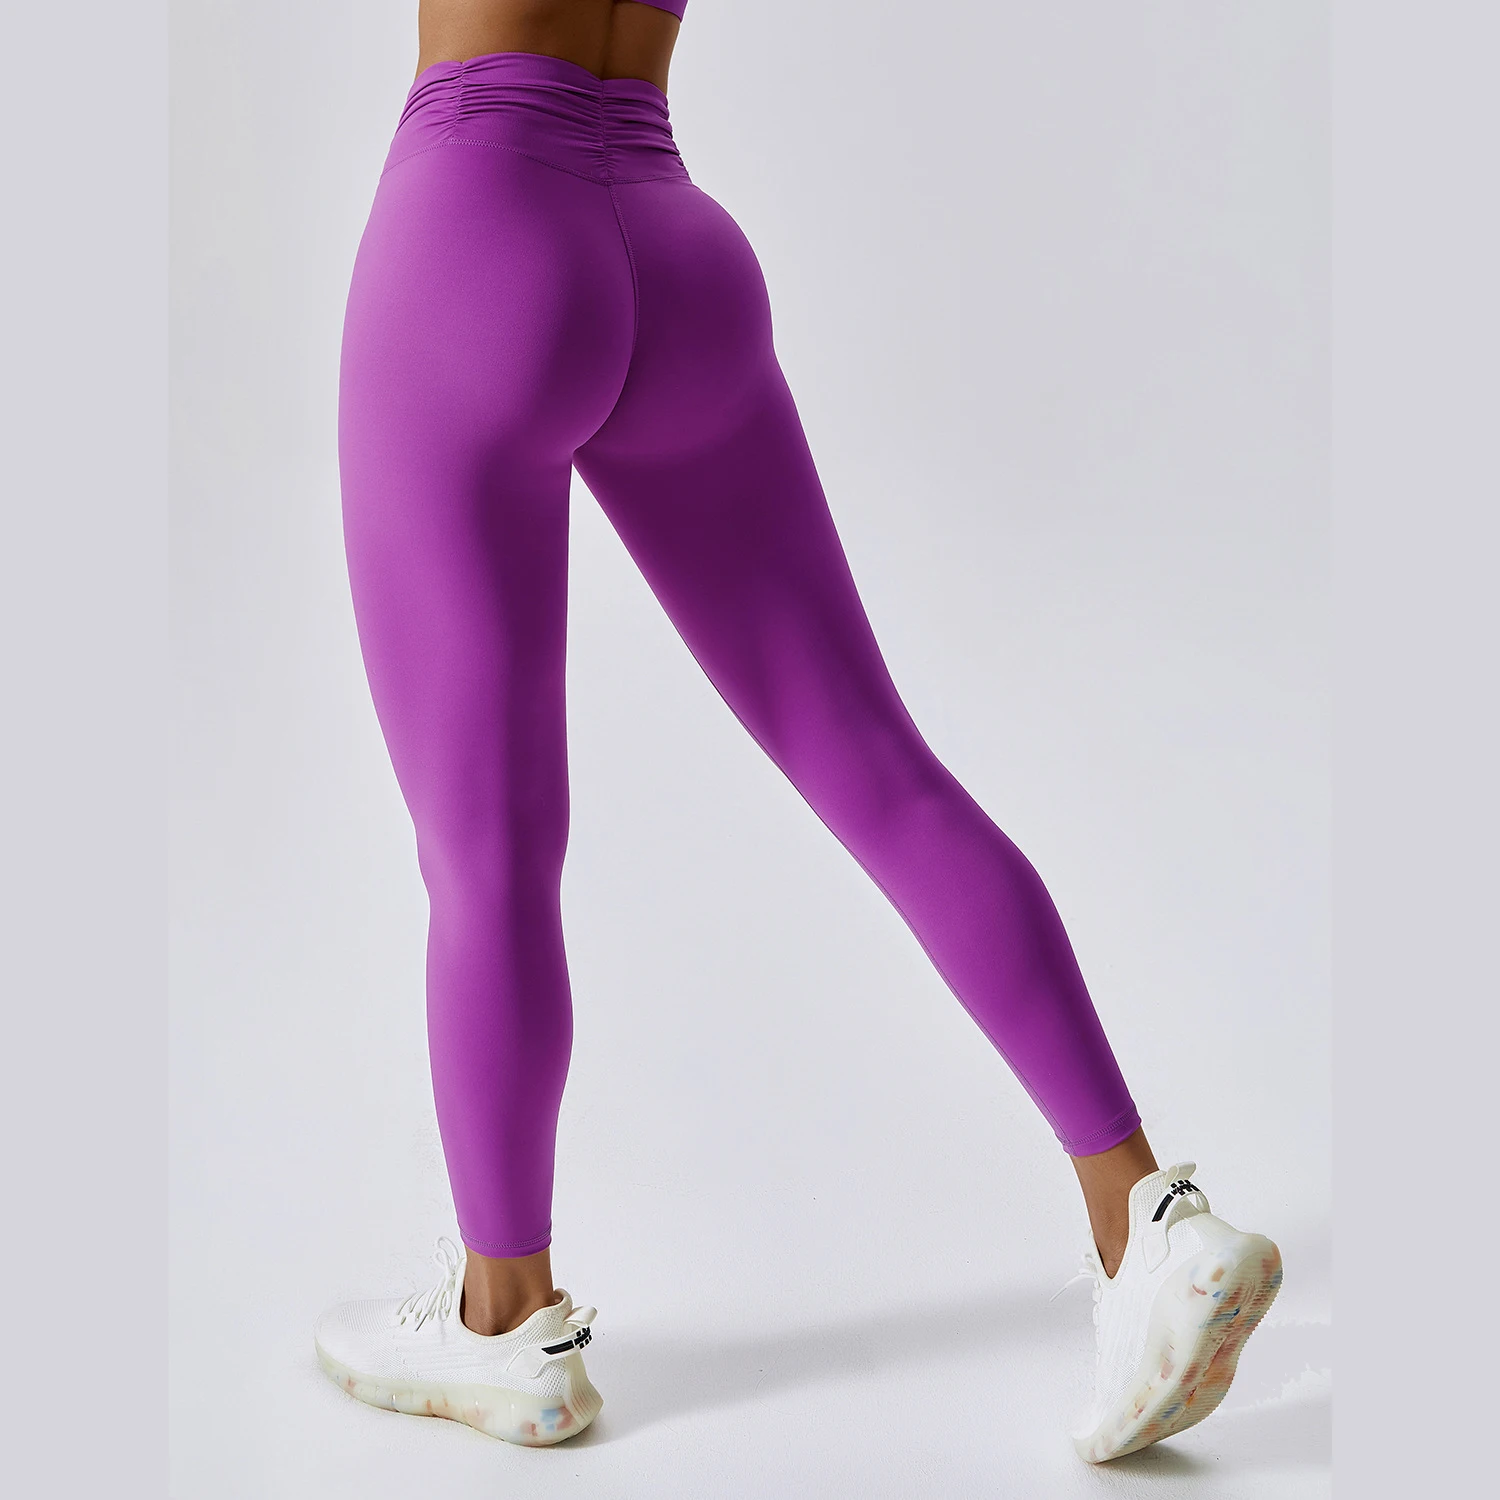 

Quick Drying Yoga Pants Women's High Waist Sports Leggings Hip Lifted Running Tights Nude Feel Workout Legging Fitness Leggins